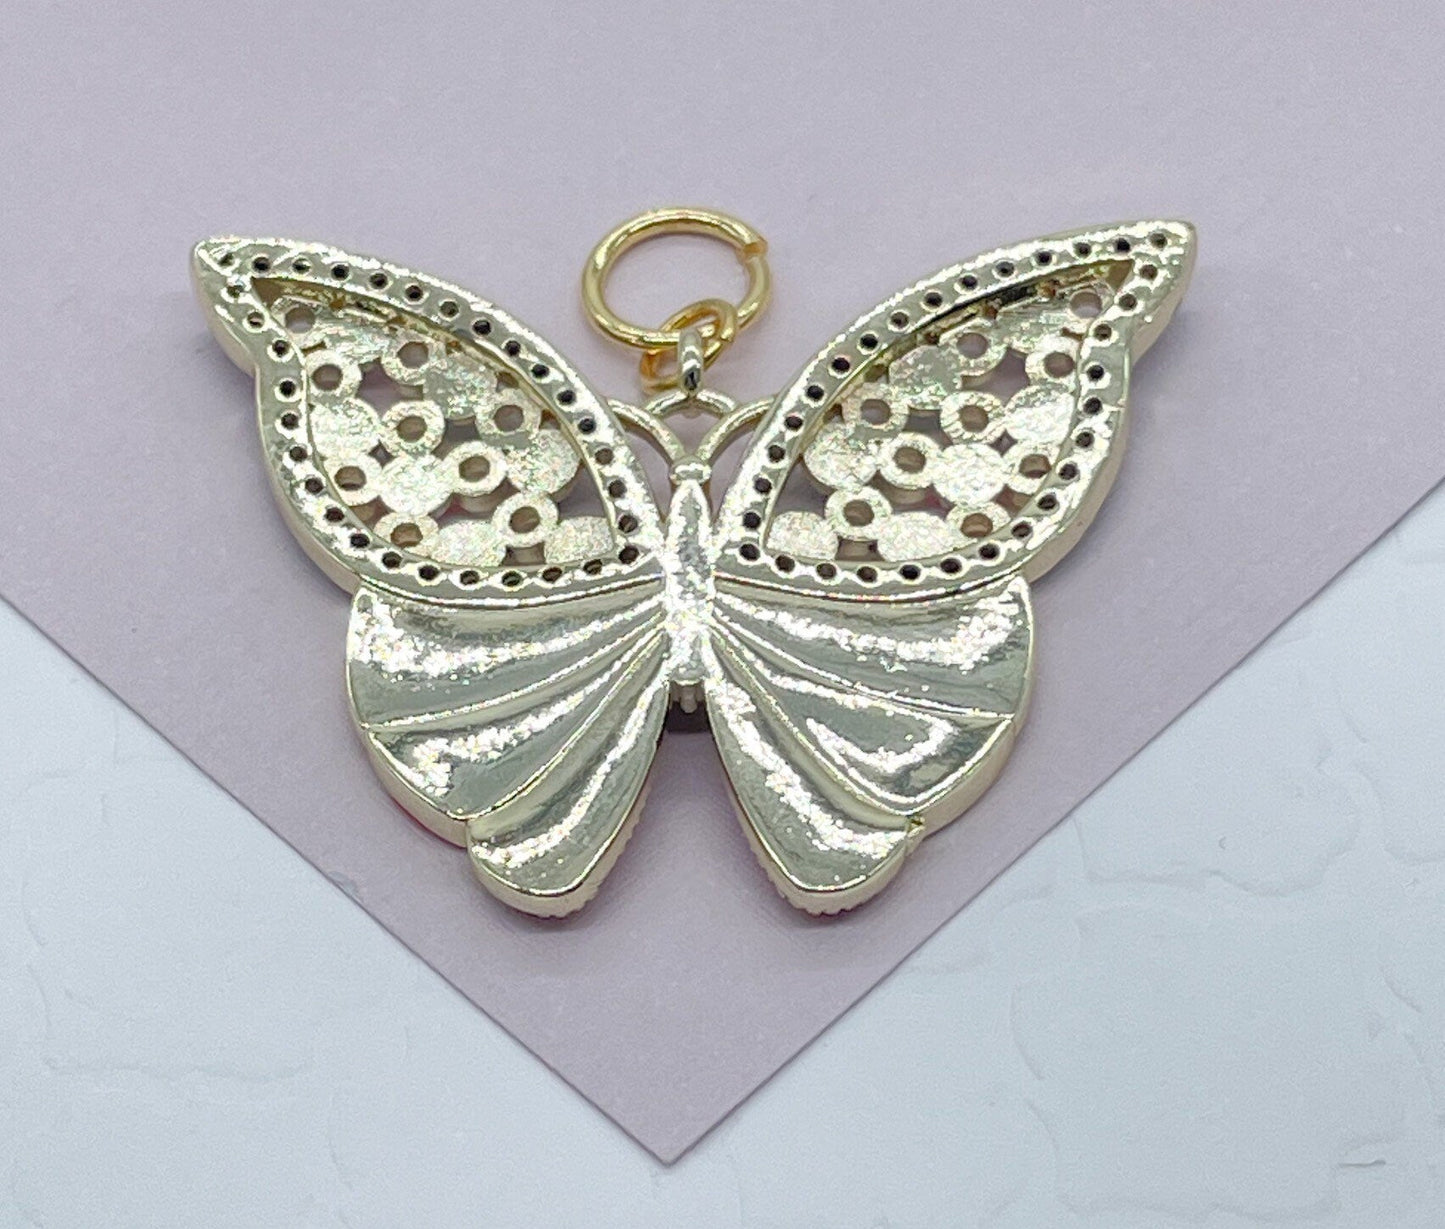 18k Gold Layered Colorful Butterfly Charm with tiny Evil Eyes Wholesale